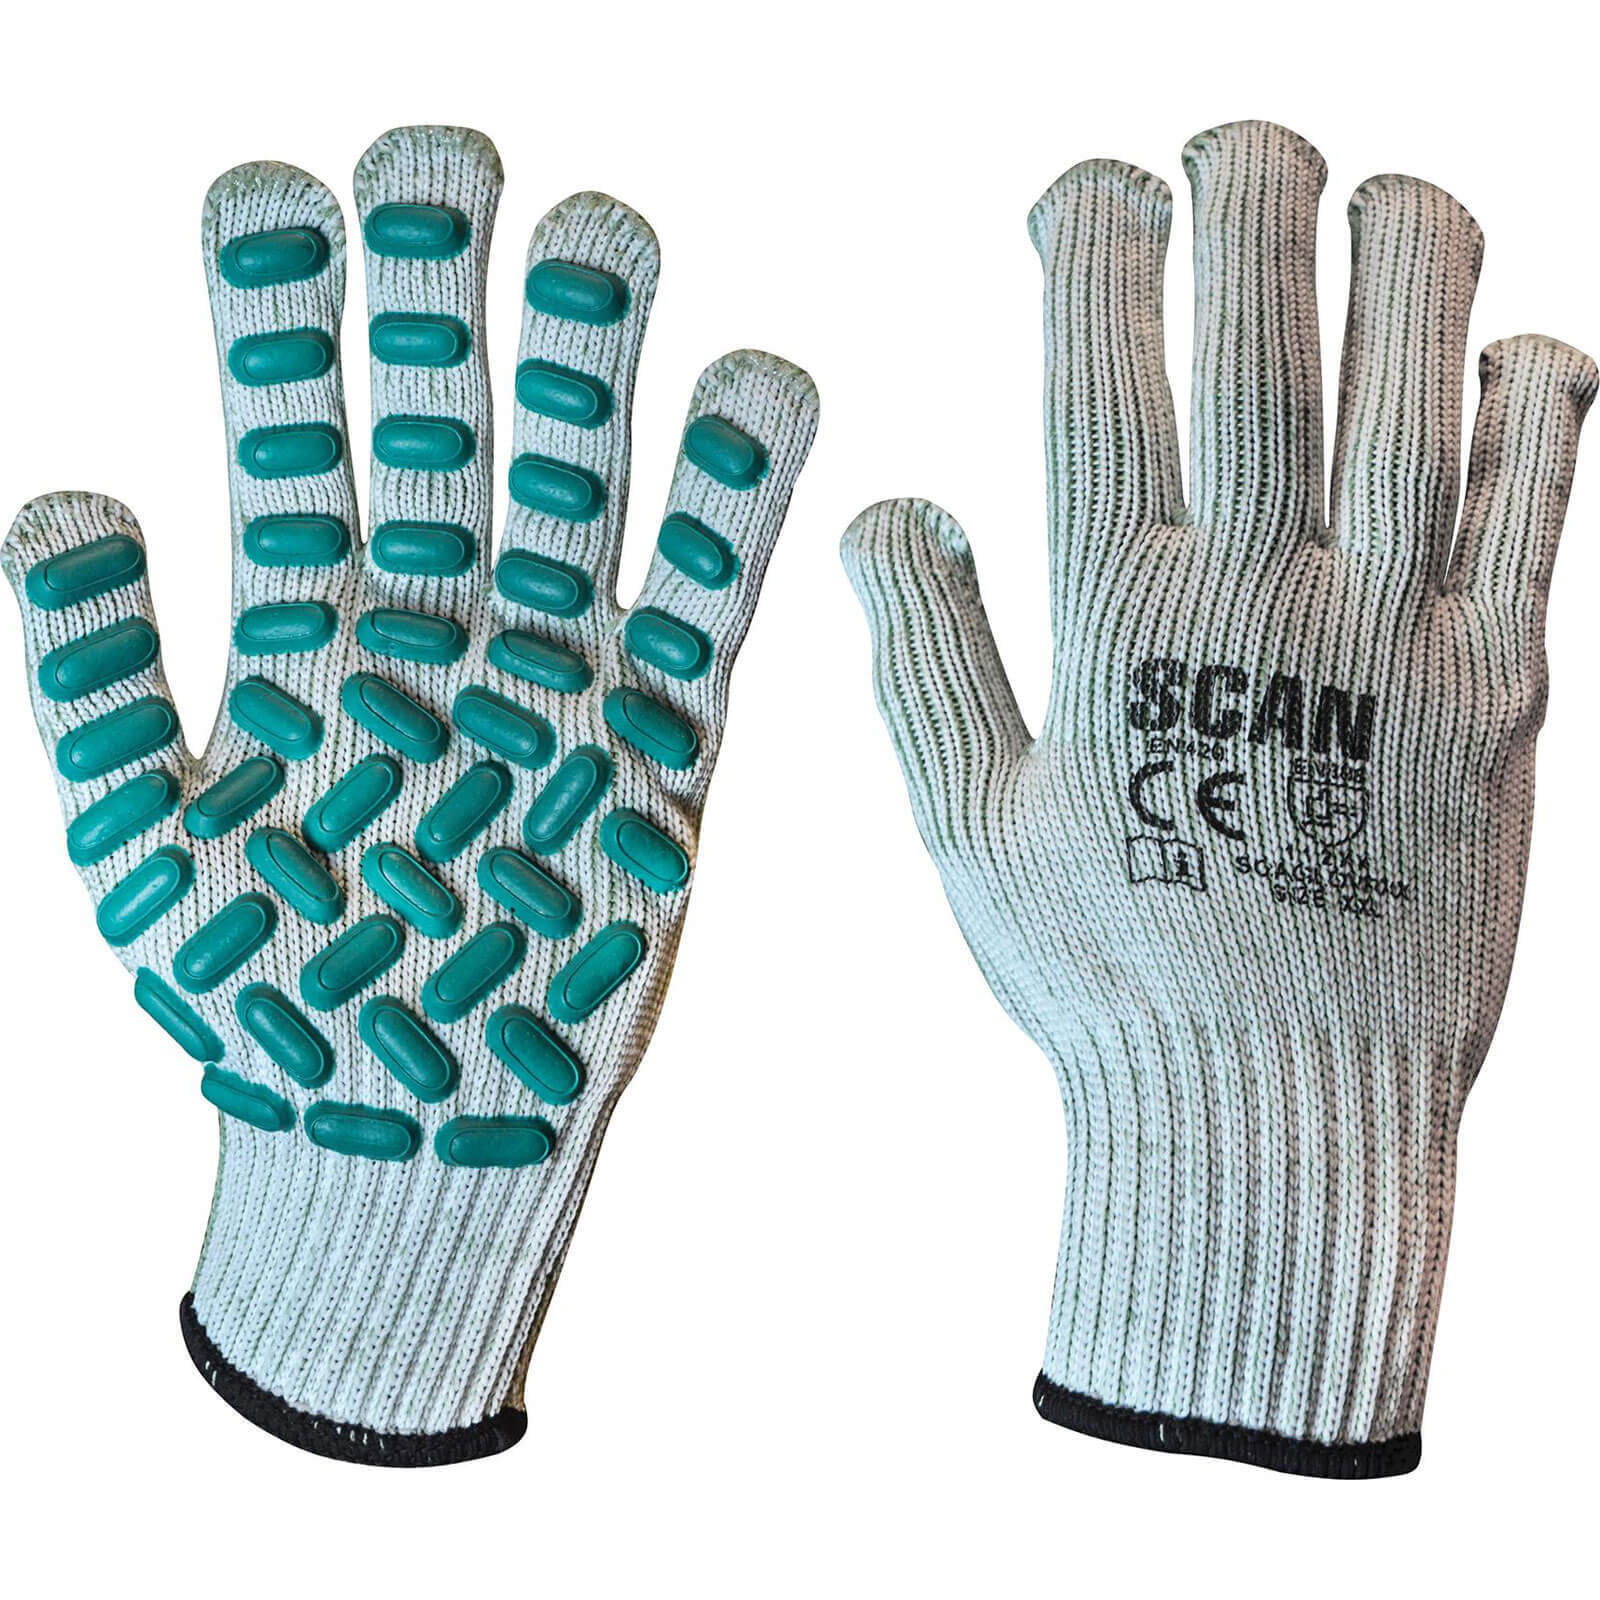 Image of Scan Vibration Resistant Latex Foam Gloves Grey / Green 2XL